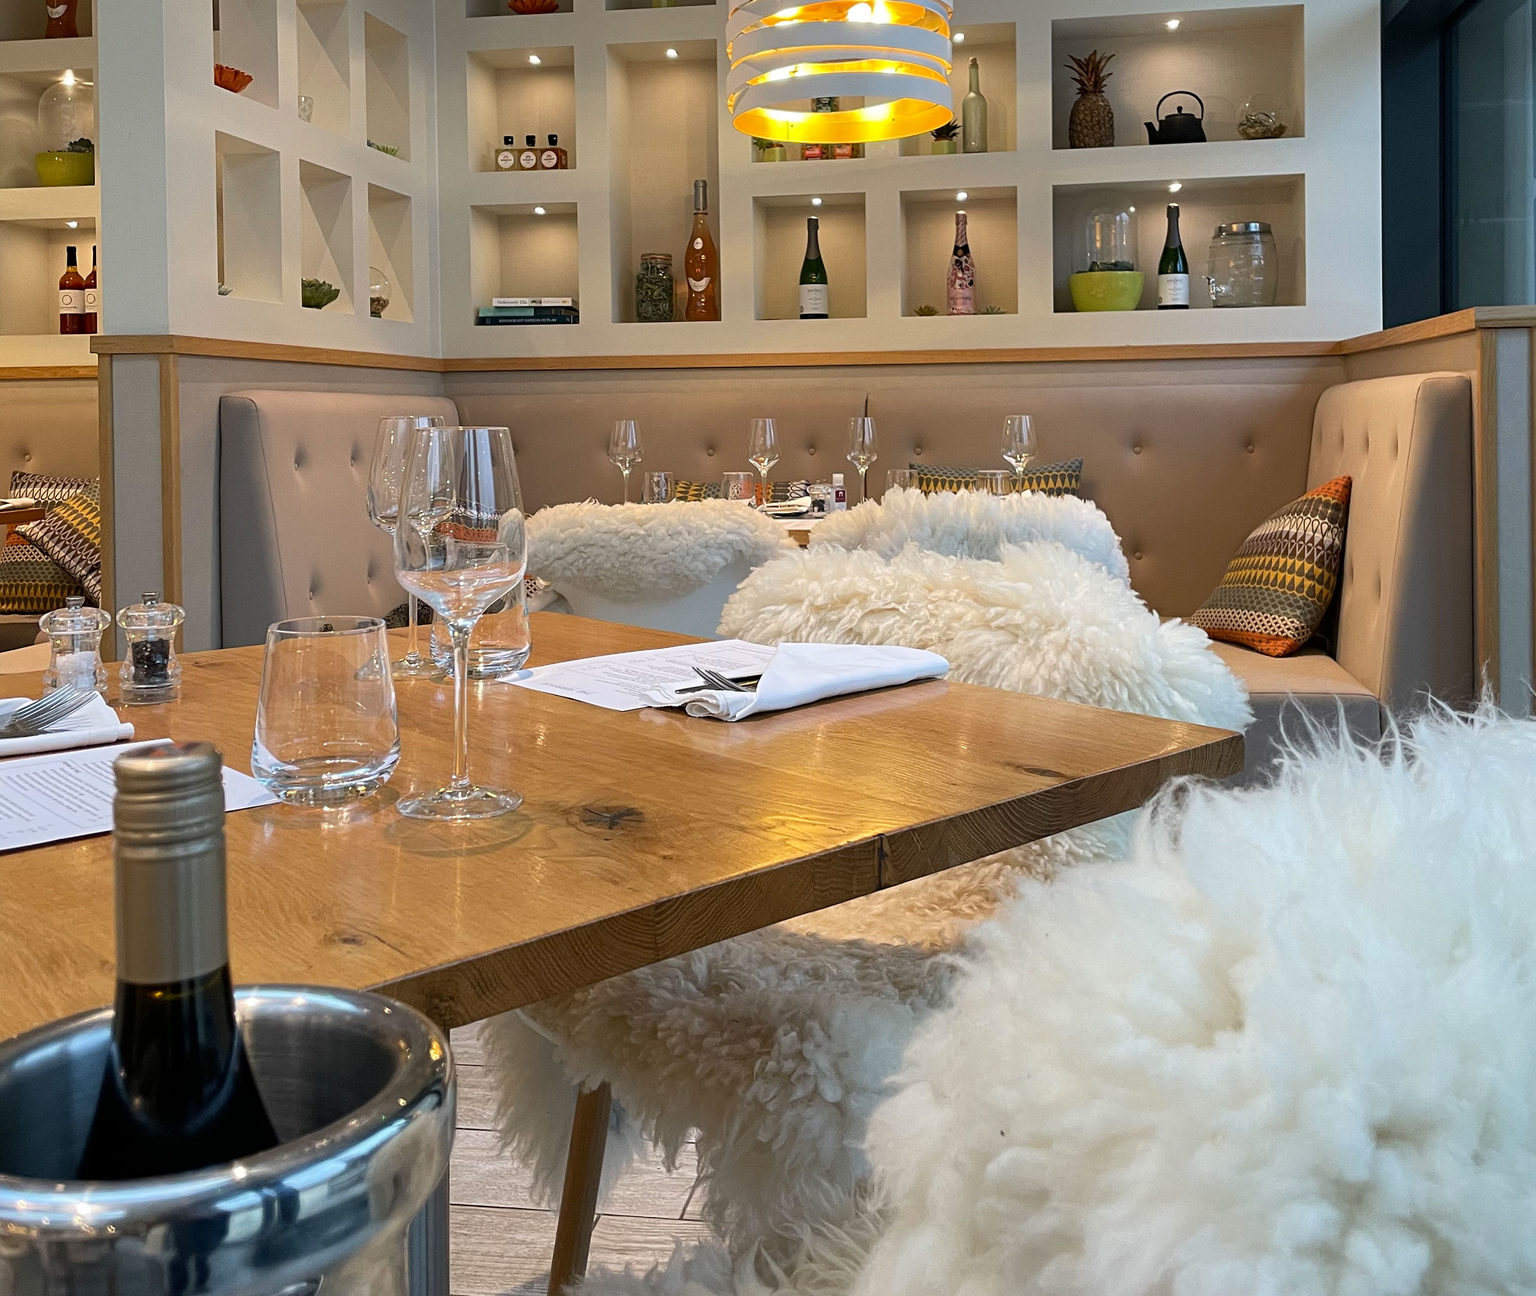 Dinner for two at Terrace Restaurant and Bar on the Swinton Estate